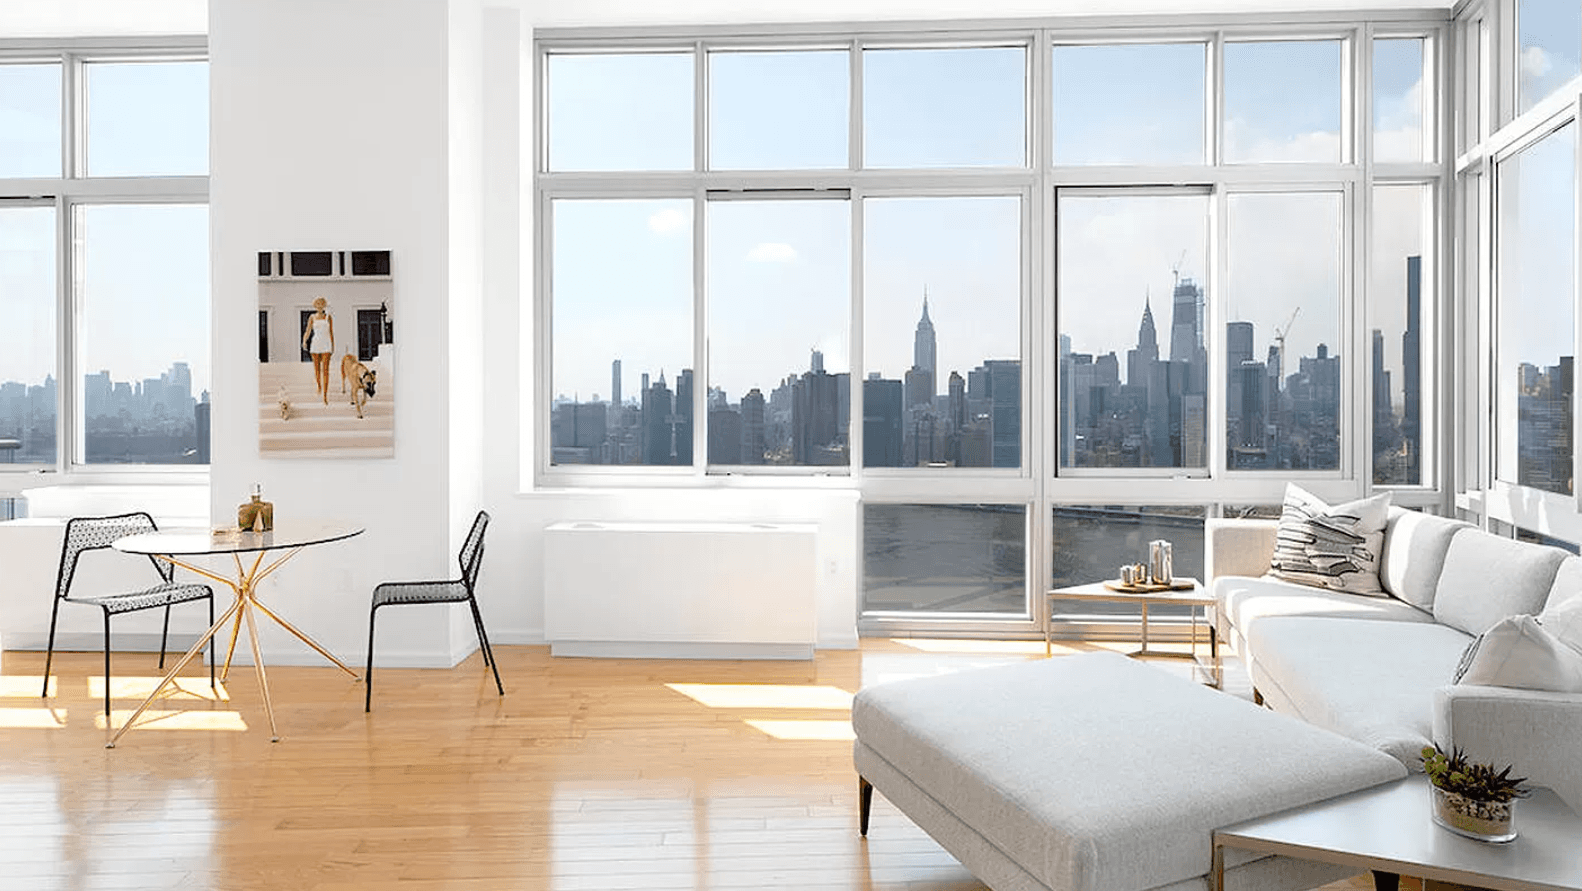 WELCOME TO THIS LUXURY 2BR/2BA HIGH-RISE HUNTERS POINT BUILDING, OVERSEEING MANHATTAN'S SKYLINE